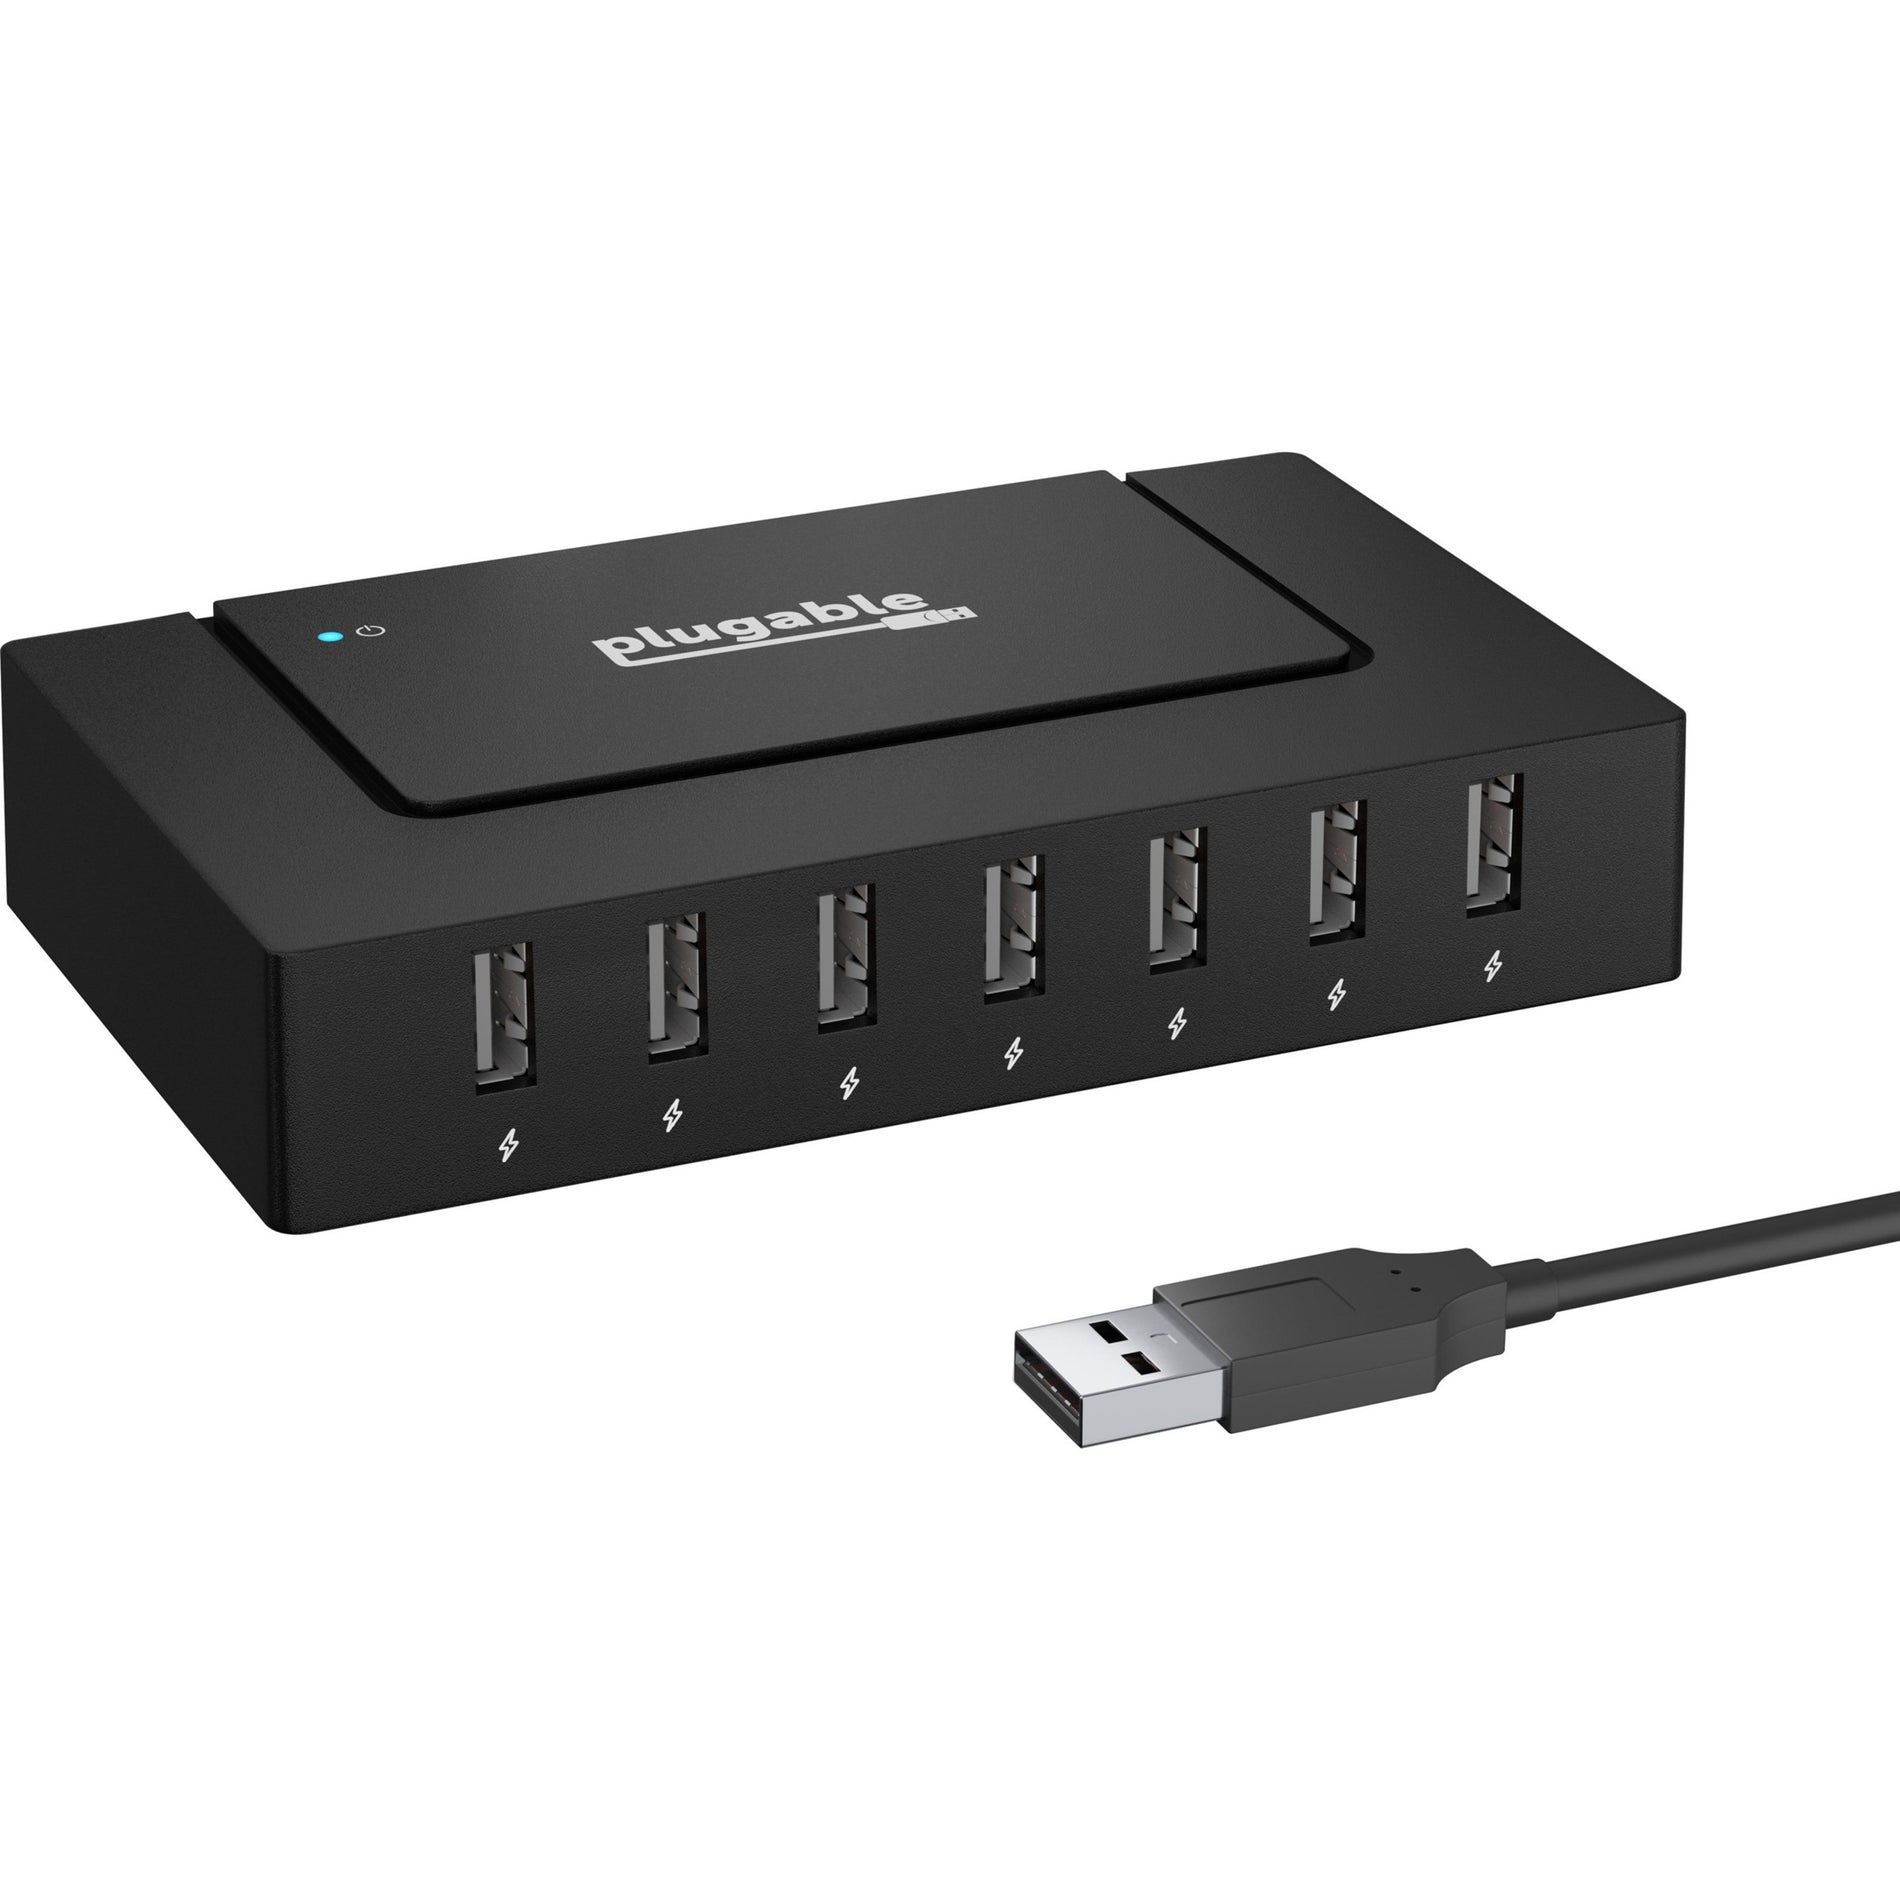 Plugable USB2-HUB7BC USB 2.0 7-Port High Speed Charging Hub, Fast Charging for Multiple Devices [Discontinued]